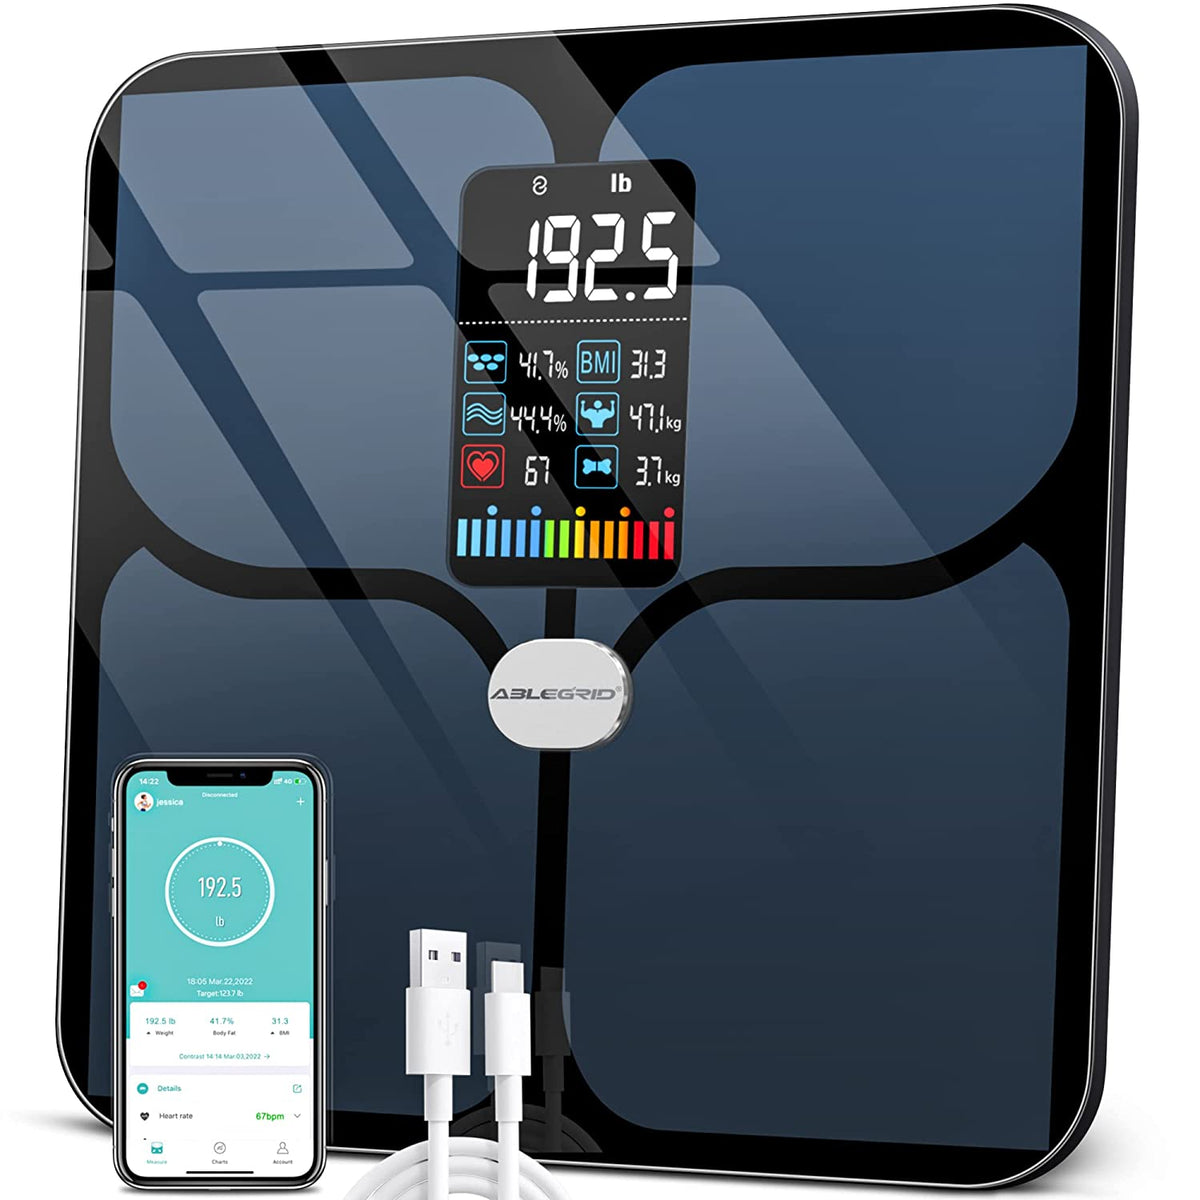 Top 2 Best Smart Scale Pro-BMI Weight Analysis With Bluetooth